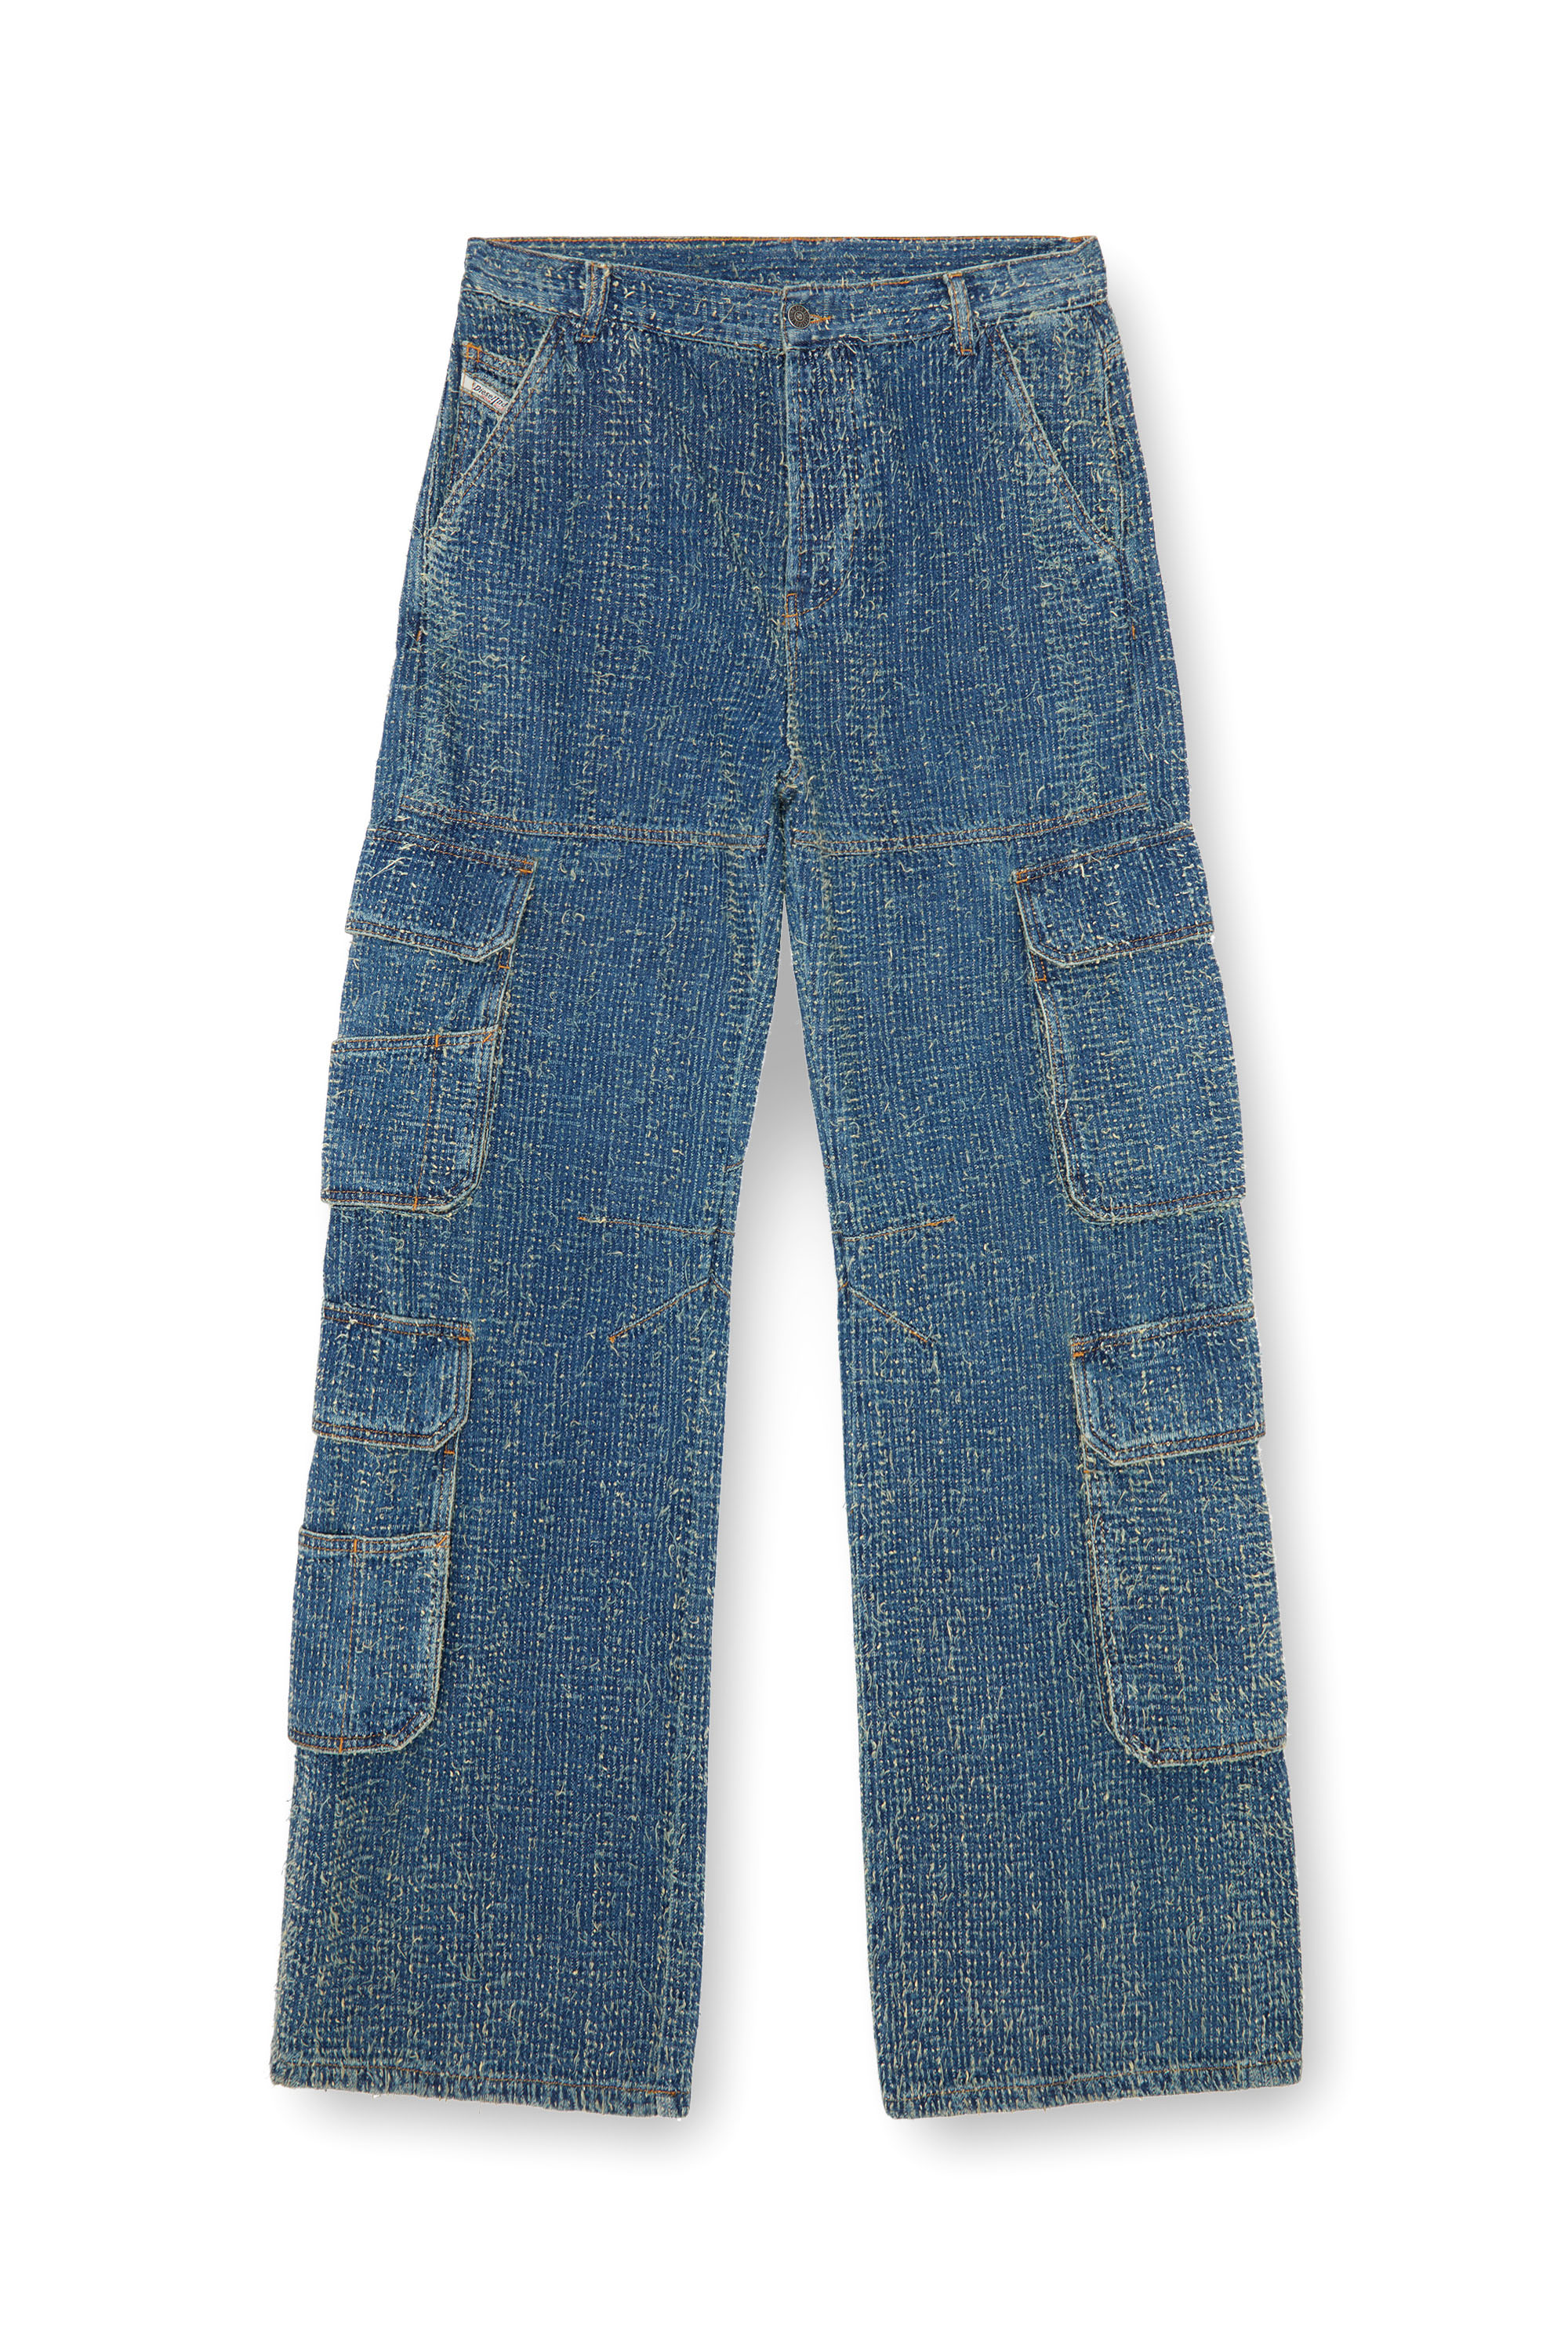 Diesel - Straight Jeans 1996 D-Sire 0PGAH, Mujer Straight Jeans - 1996 D-Sire in Azul marino - Image 3